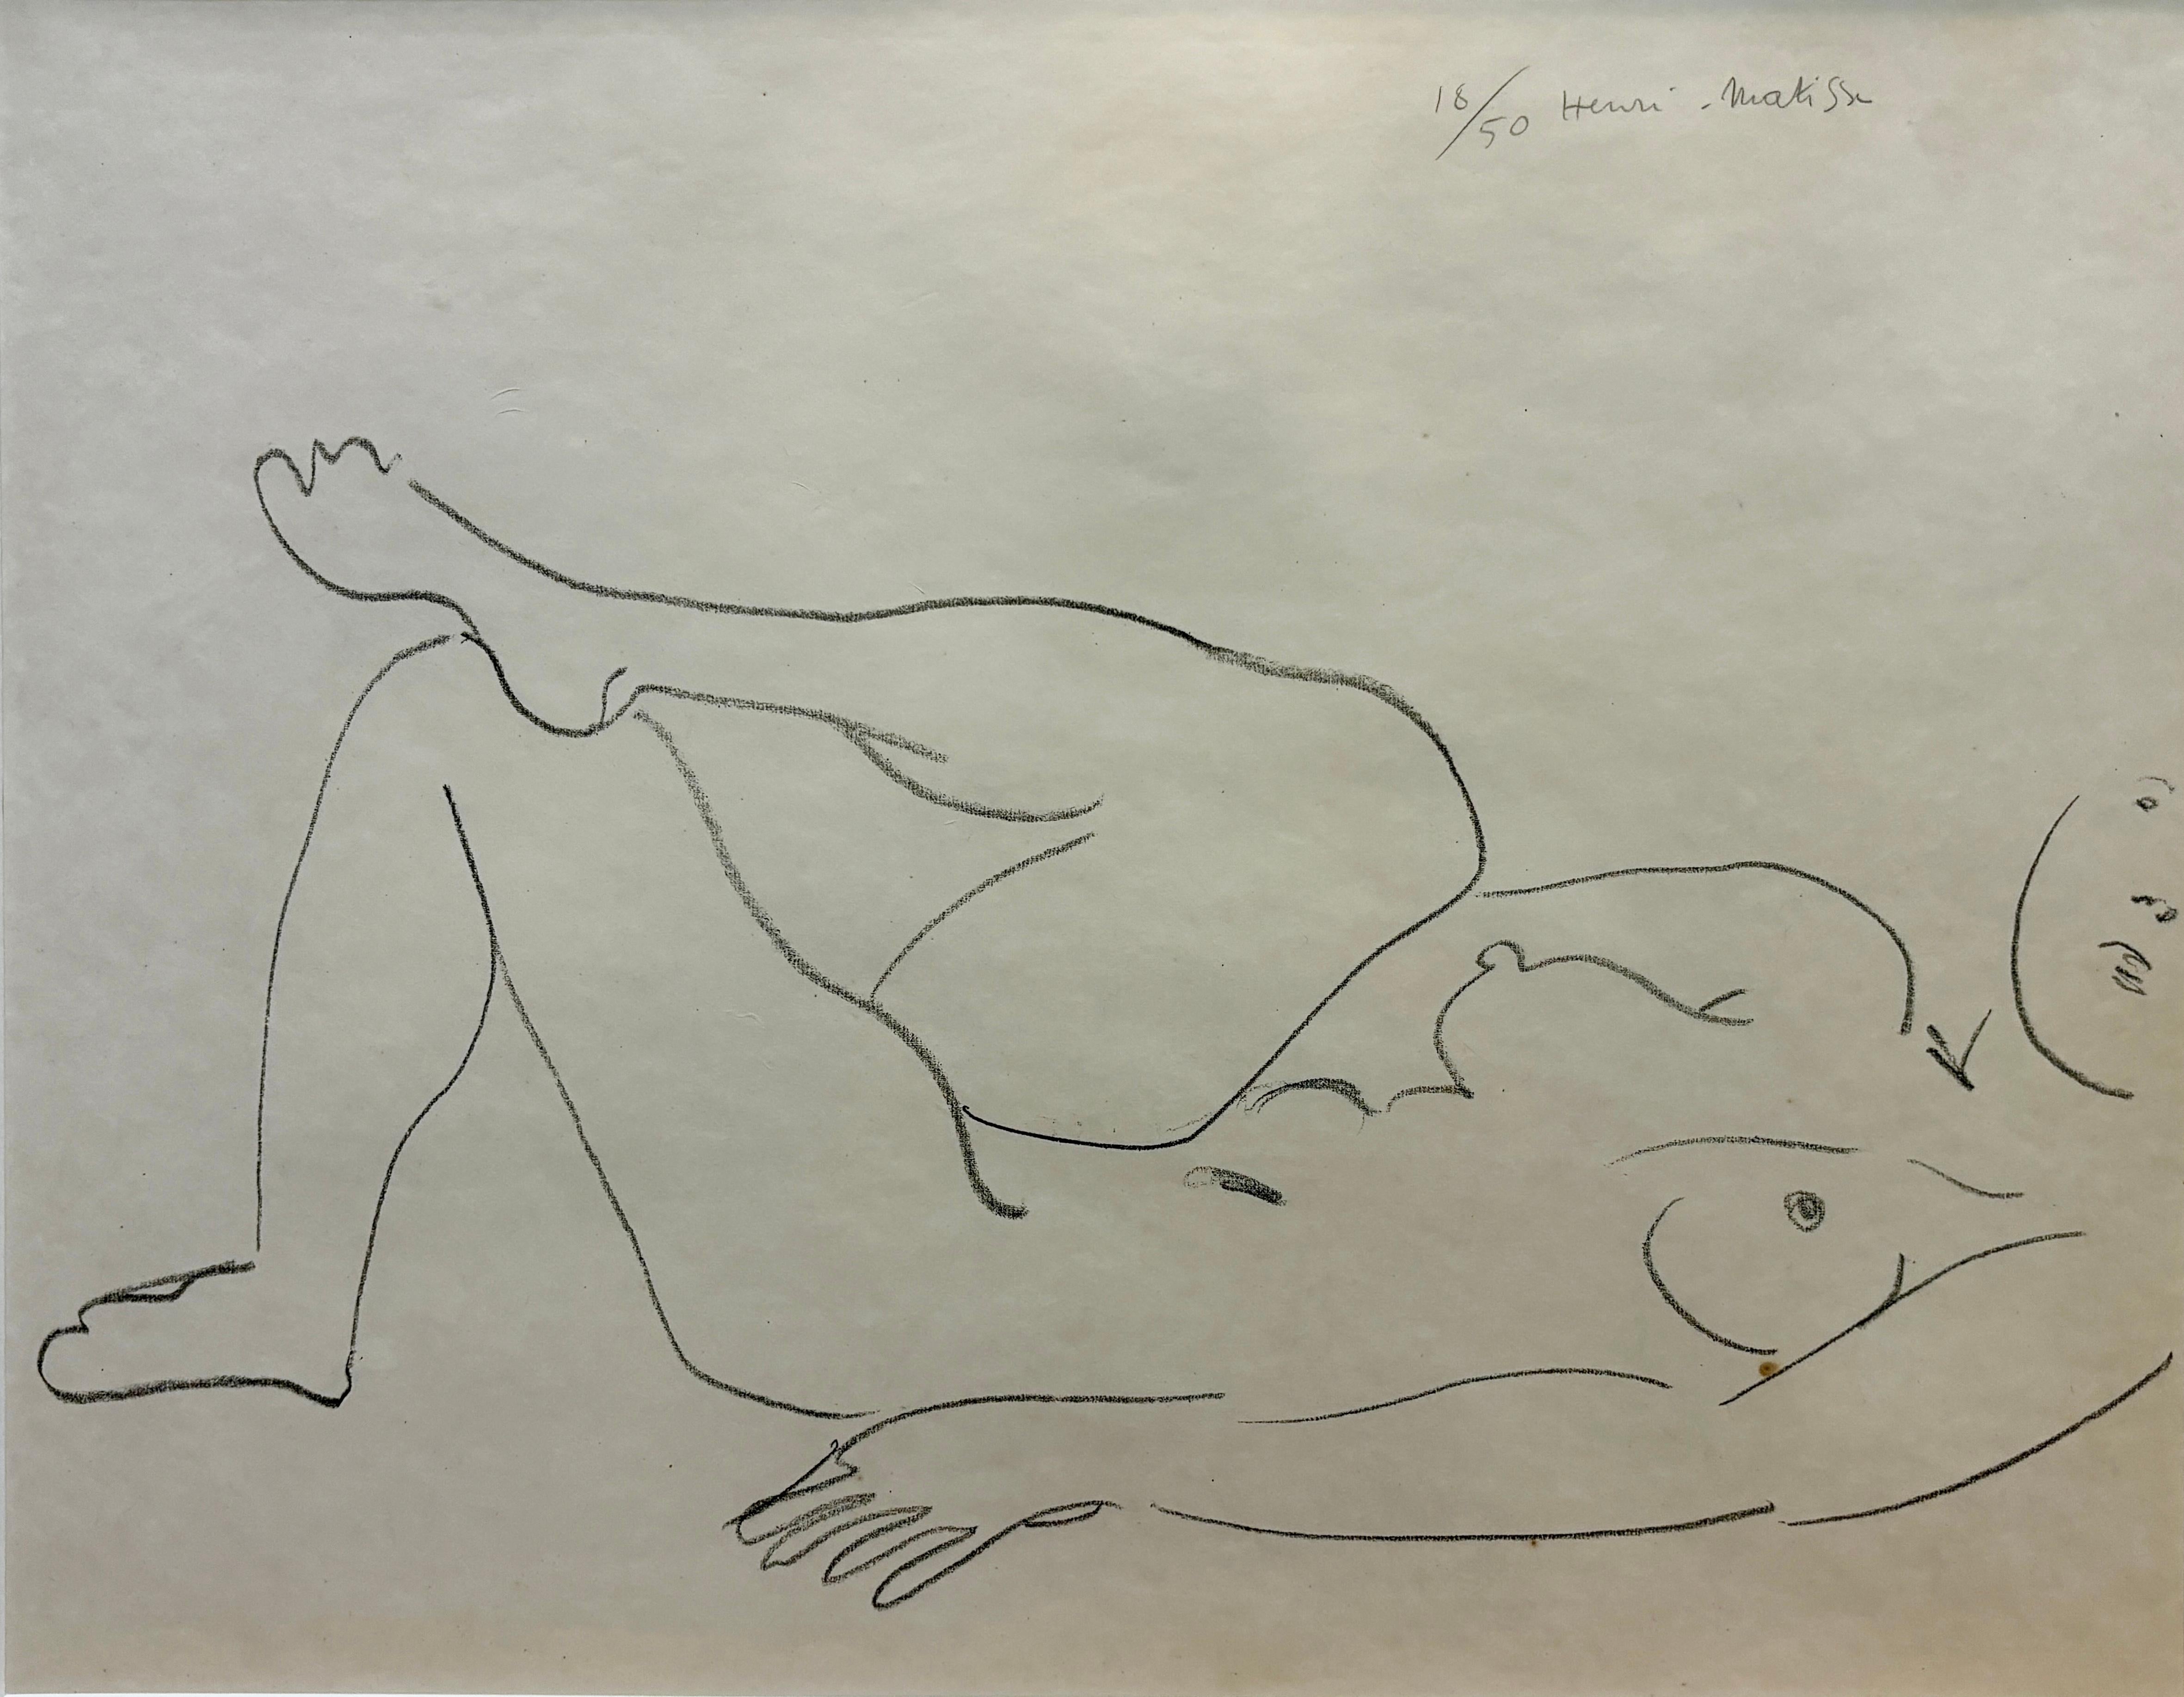 Why did Henri Matisse stop painting?